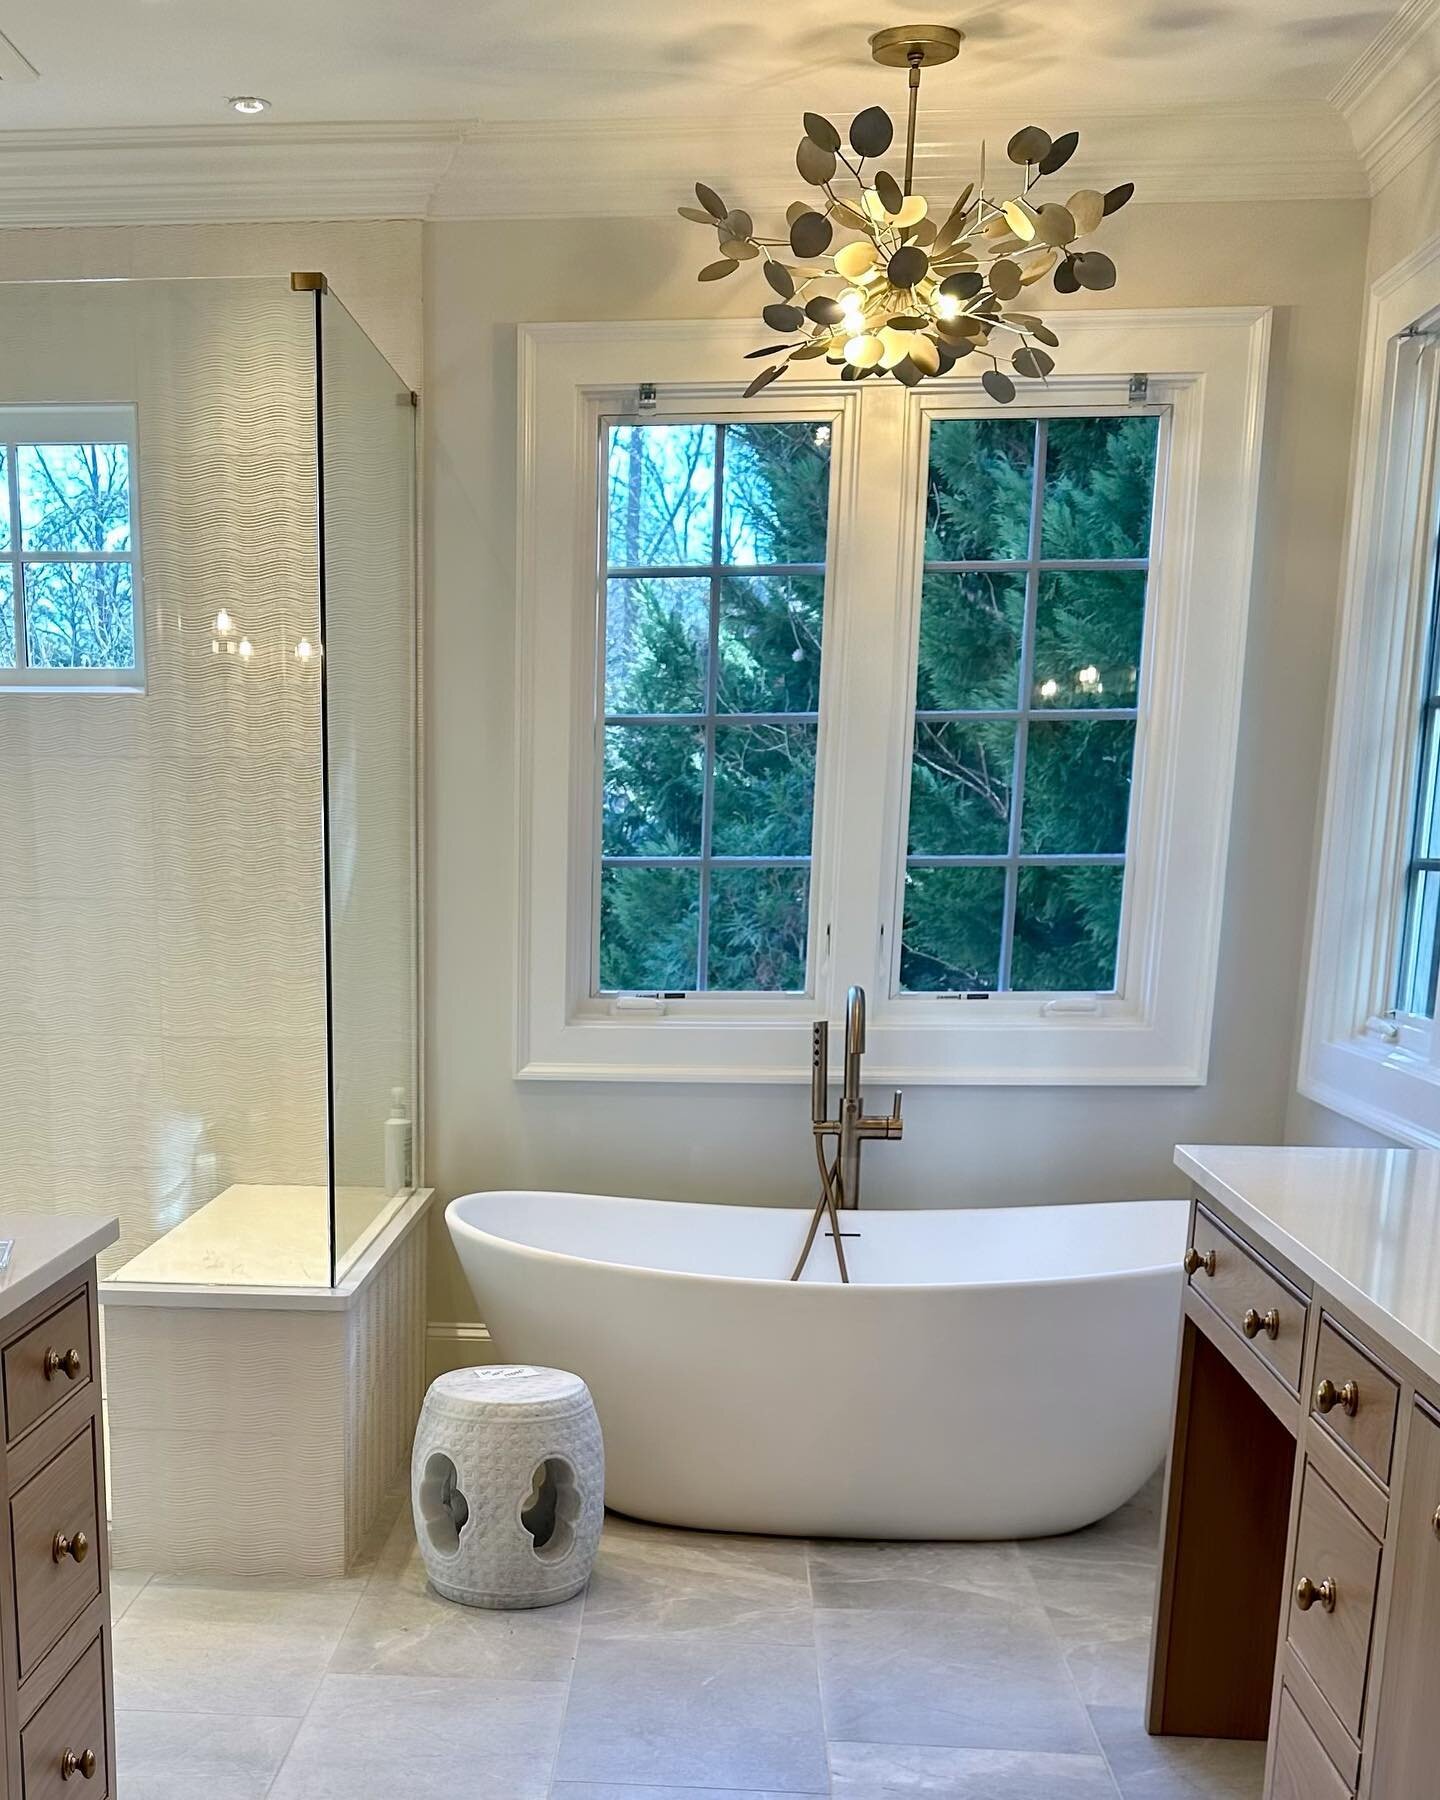 We love starting a design project during construction so we can select materials that make a space unique and special. 

There is so much to choose from to make each space unique and special by mixing materials. In this bathroom renovation, we used a